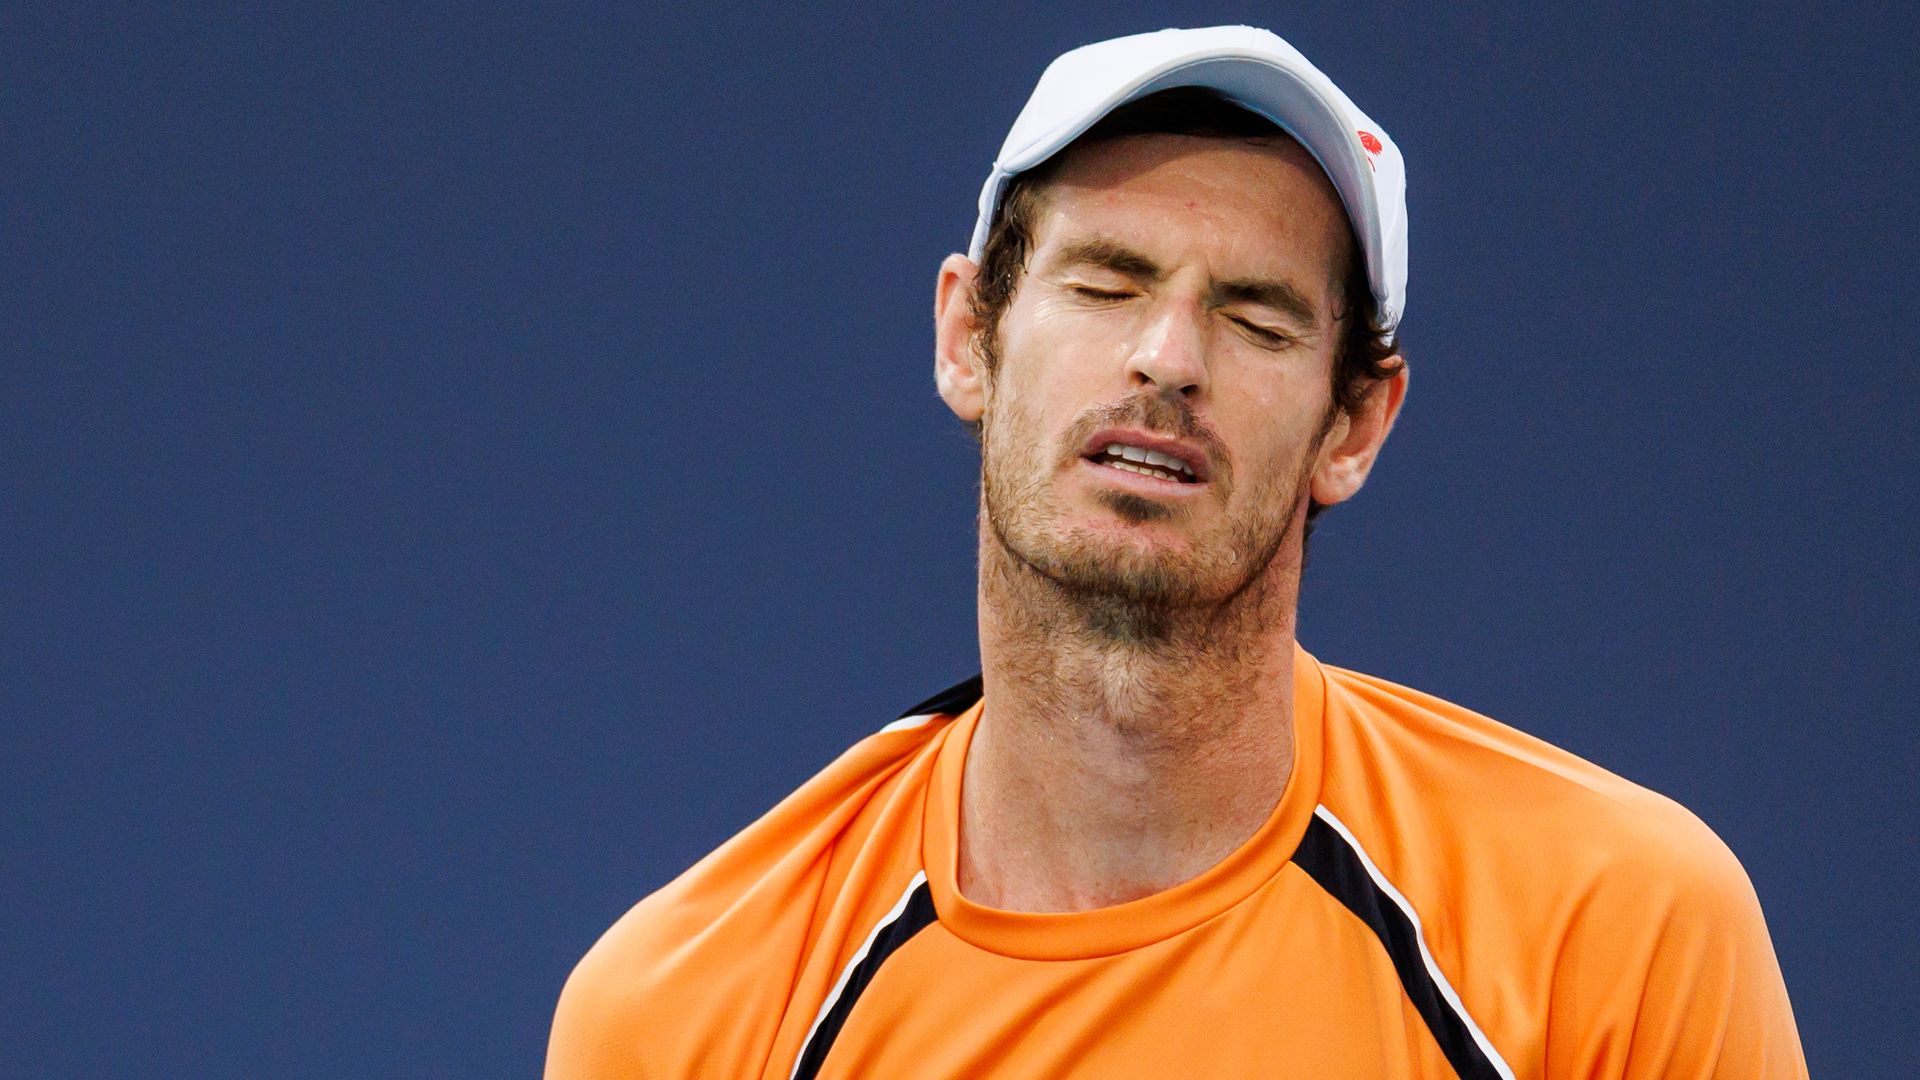 Murray's injury timeline: Troubles since 2017 and ankle rupture in Miami